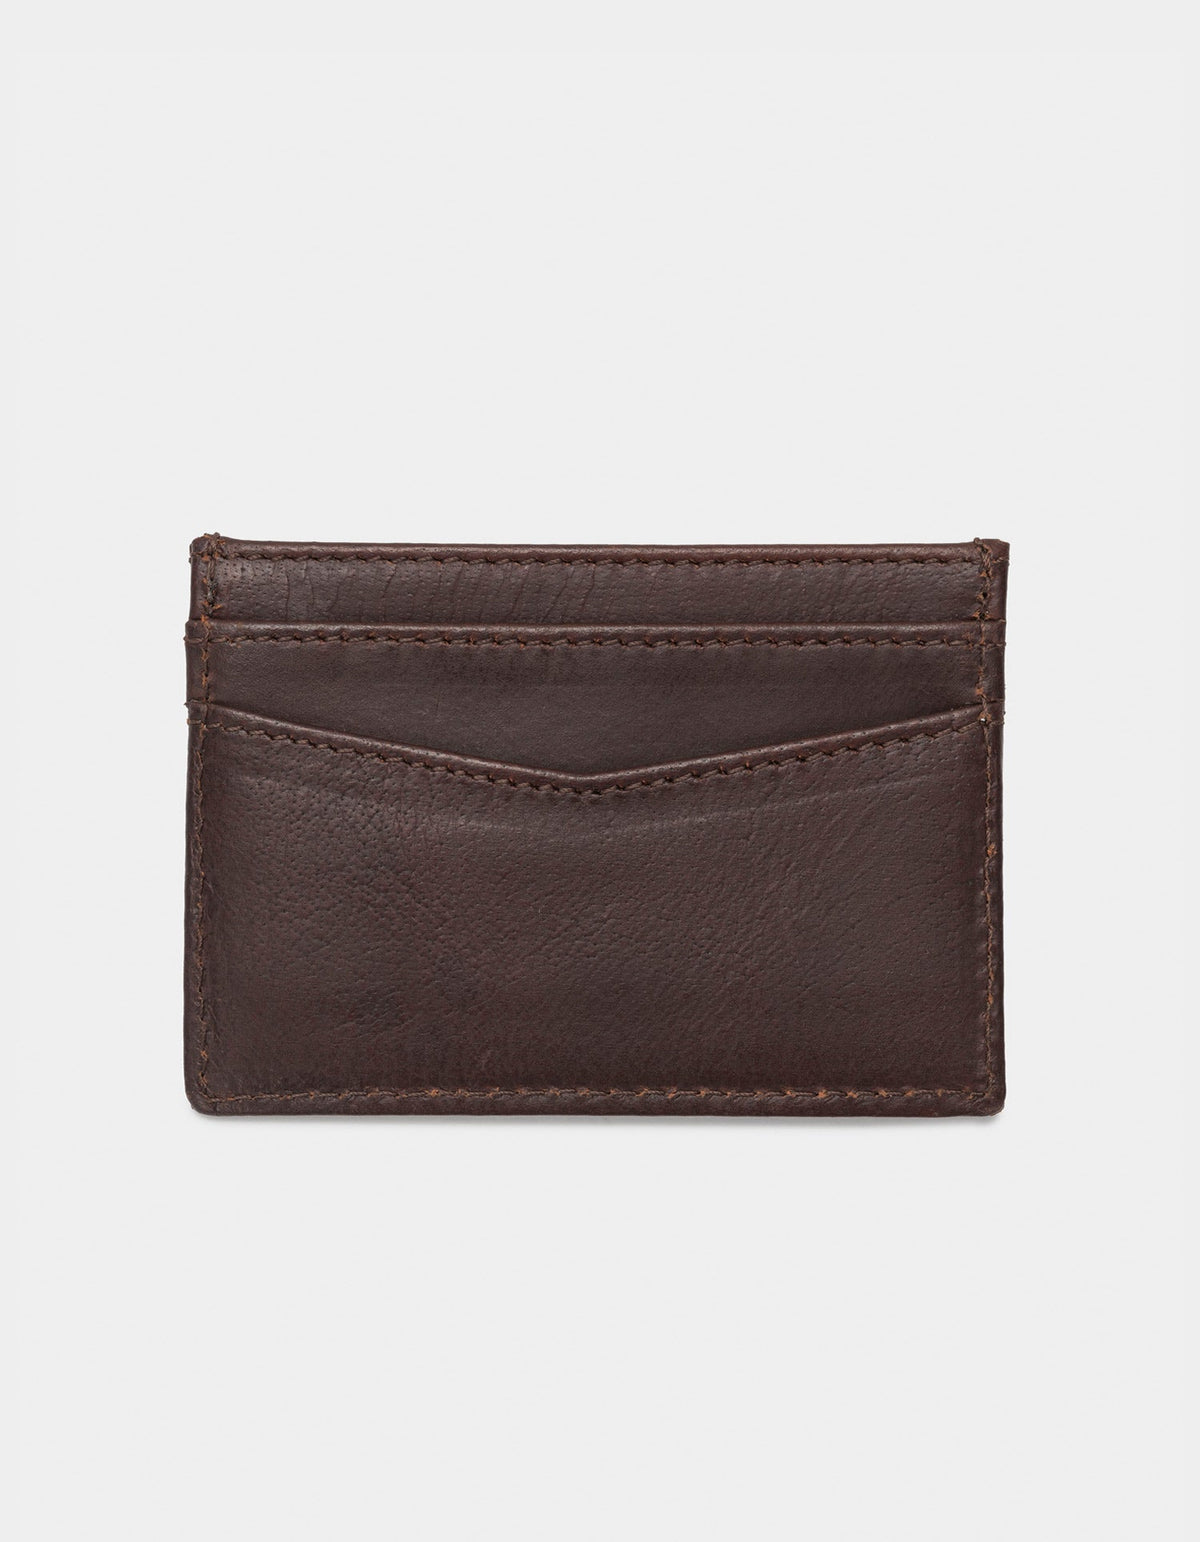 Normal Brand Leather Card Holder - Brown